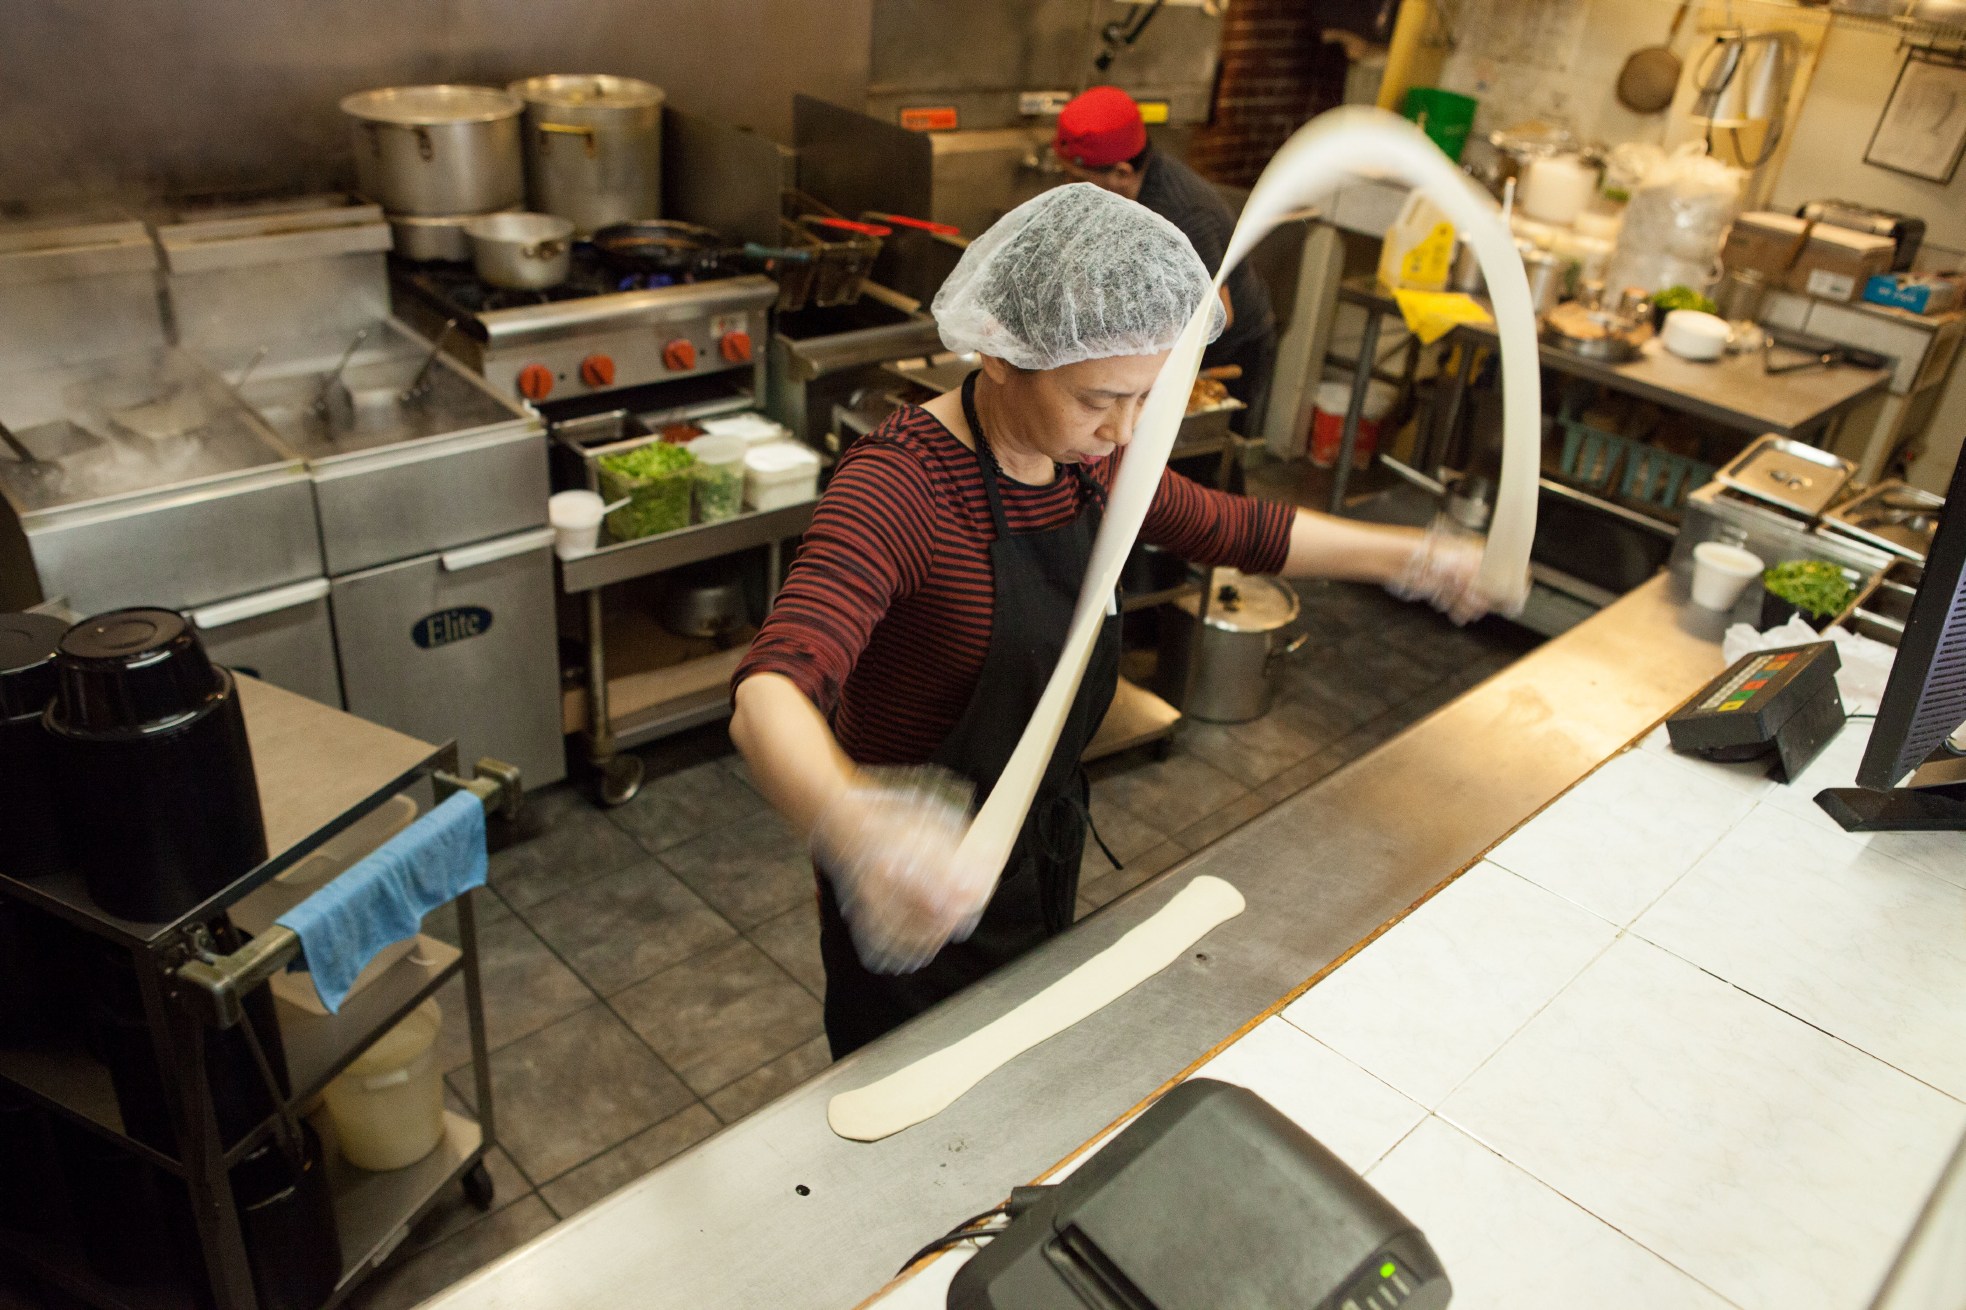 A cook pulling noodles at Gene’s Chinese Flatbread Café in Boston, MA.